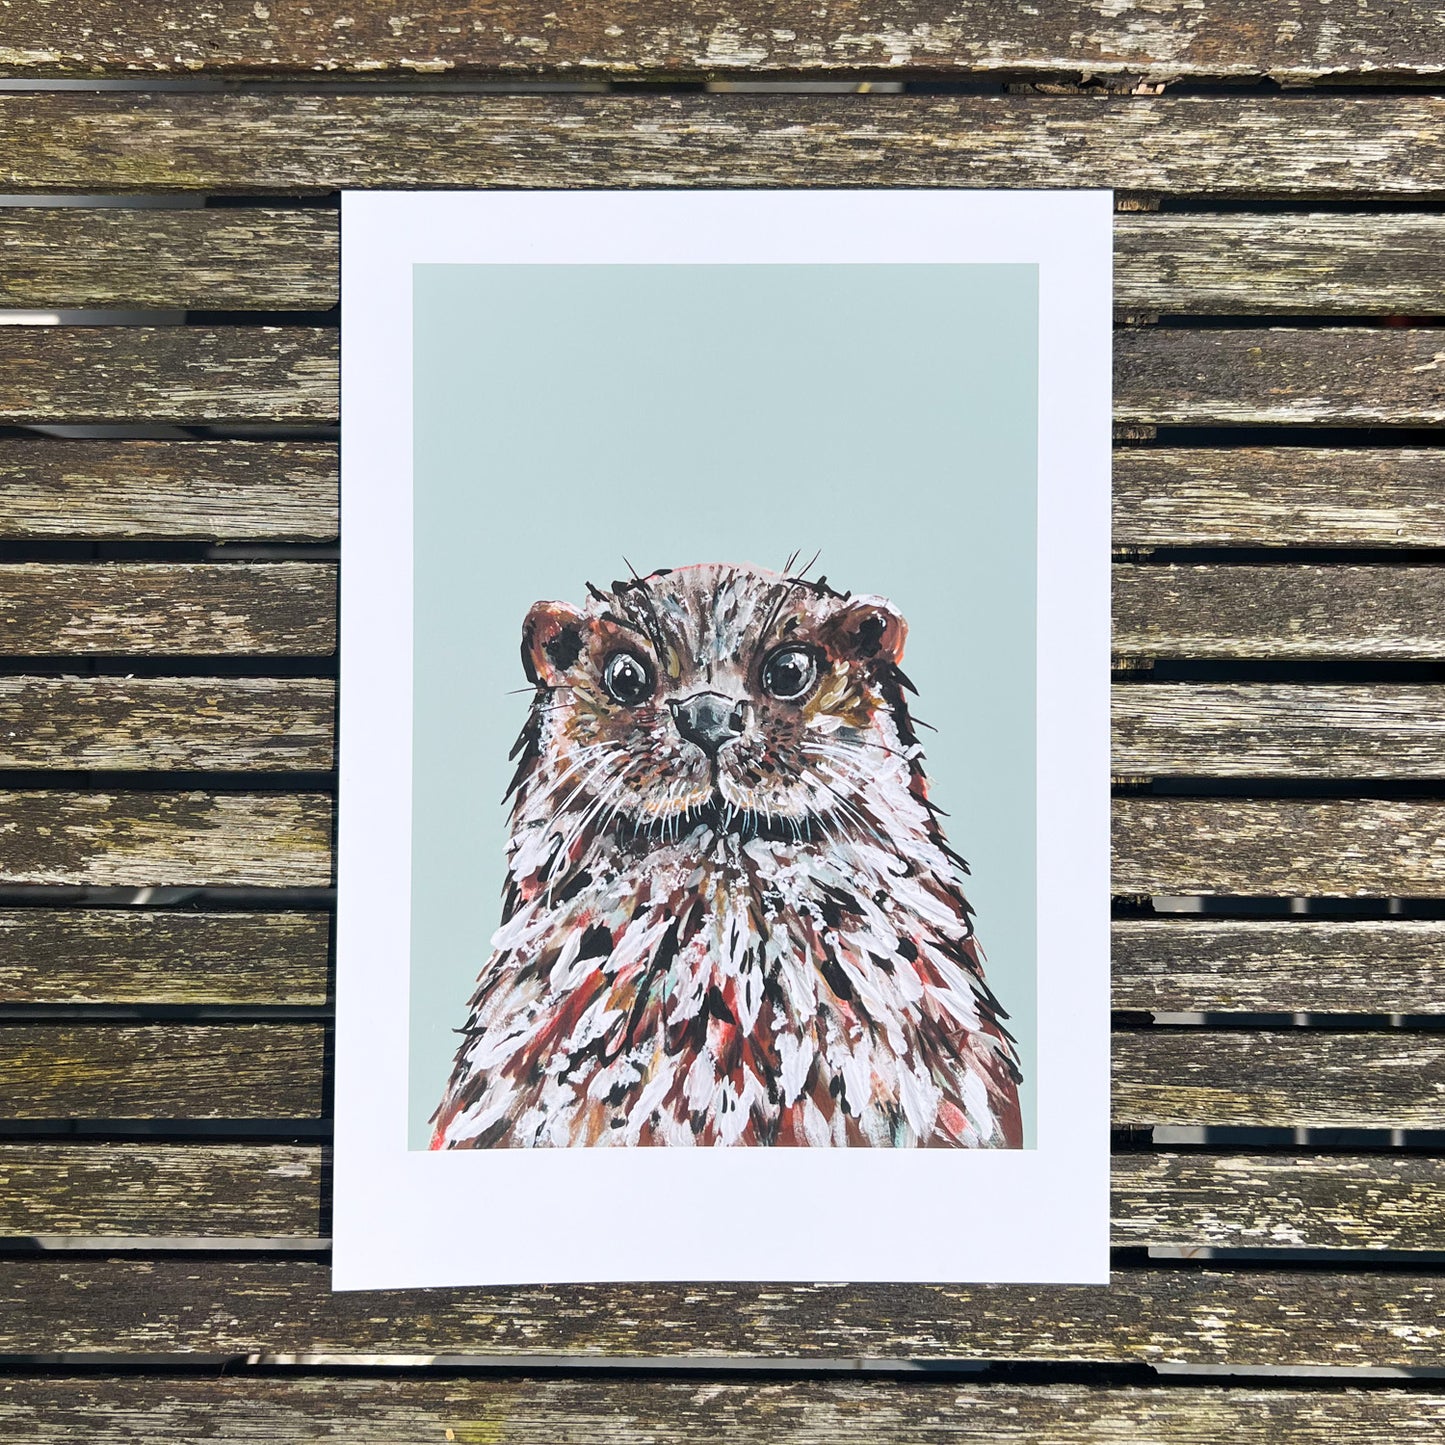 Print illustration of otter photographed from above on a wooden table.